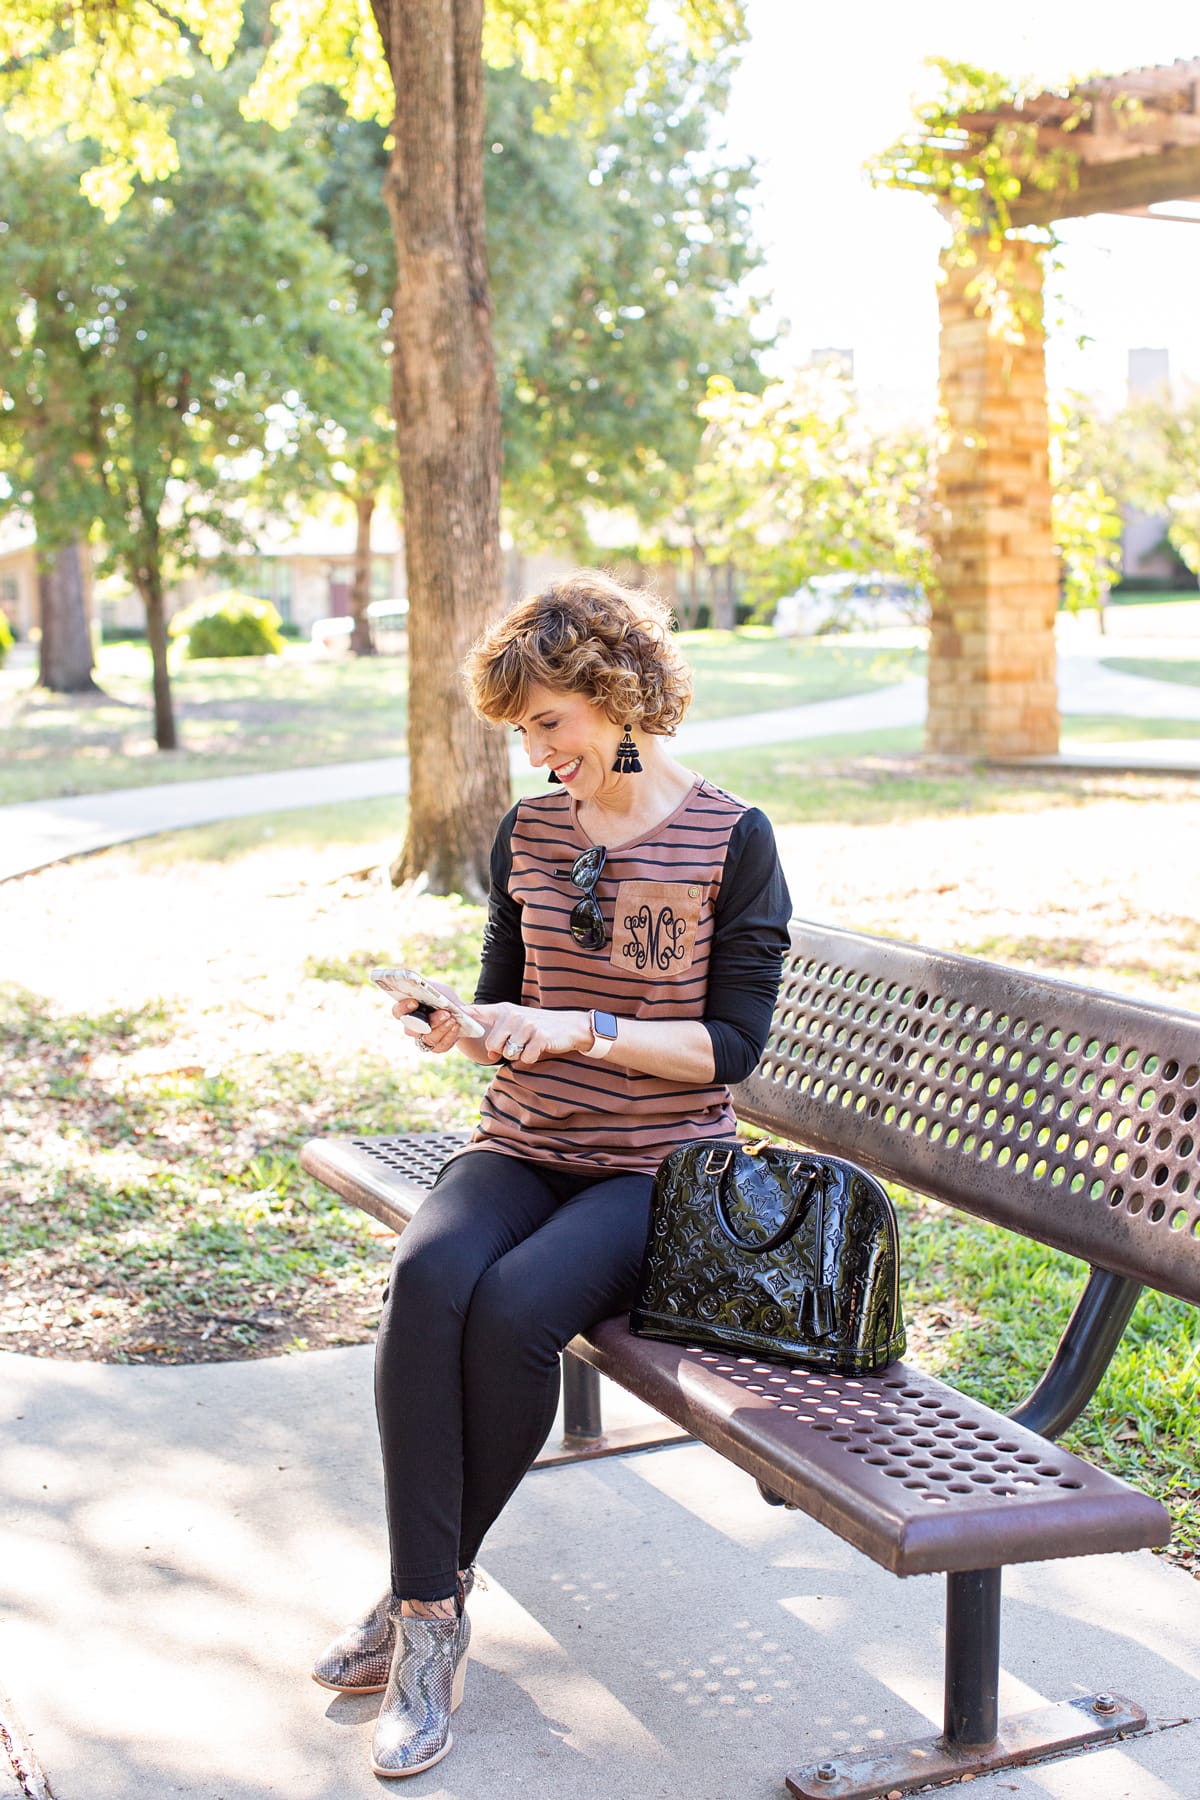 woman over 50 in brown and black outfit sitting on park bench looking at her phone